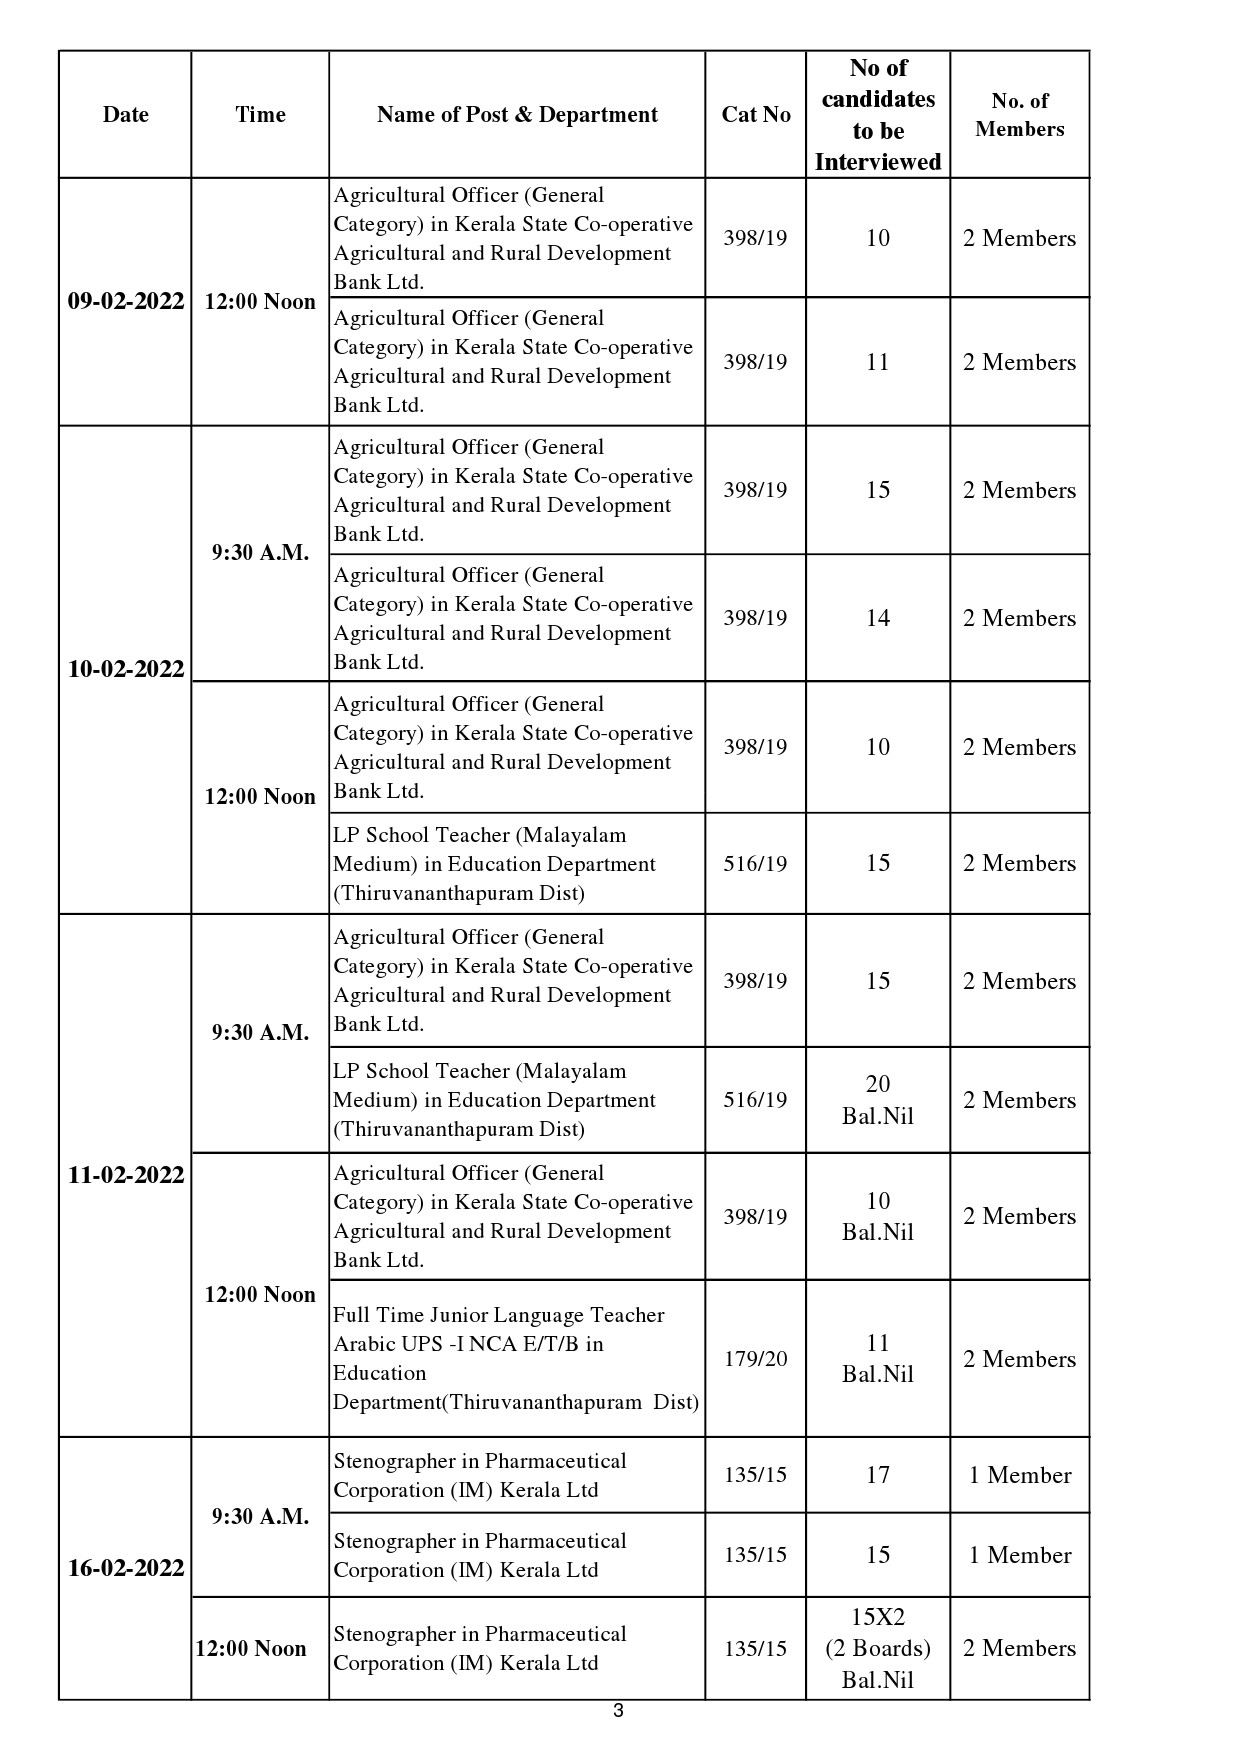 KPSC INTERVIEW PROGRAMME FOR THE MONTH OF FEBRUARY 2022 - Notification Image 3